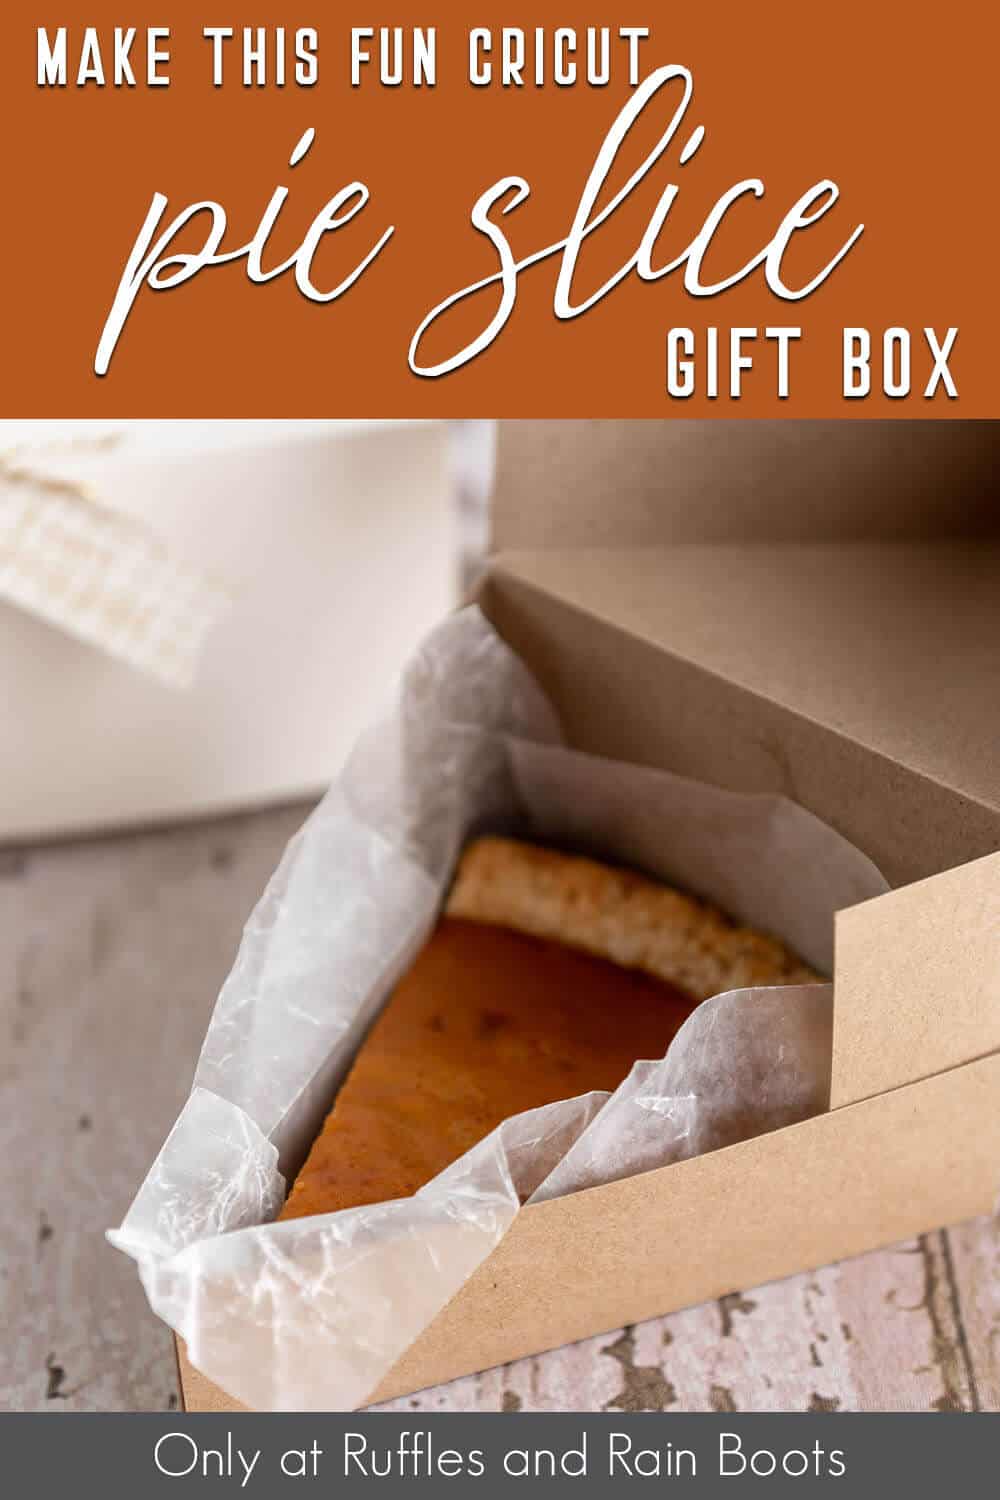 Cake slice gift box made with cricut maker and craft paper with a piece of pumpkin pie inside and with text which reads make this fun cricut pie slice gift box.